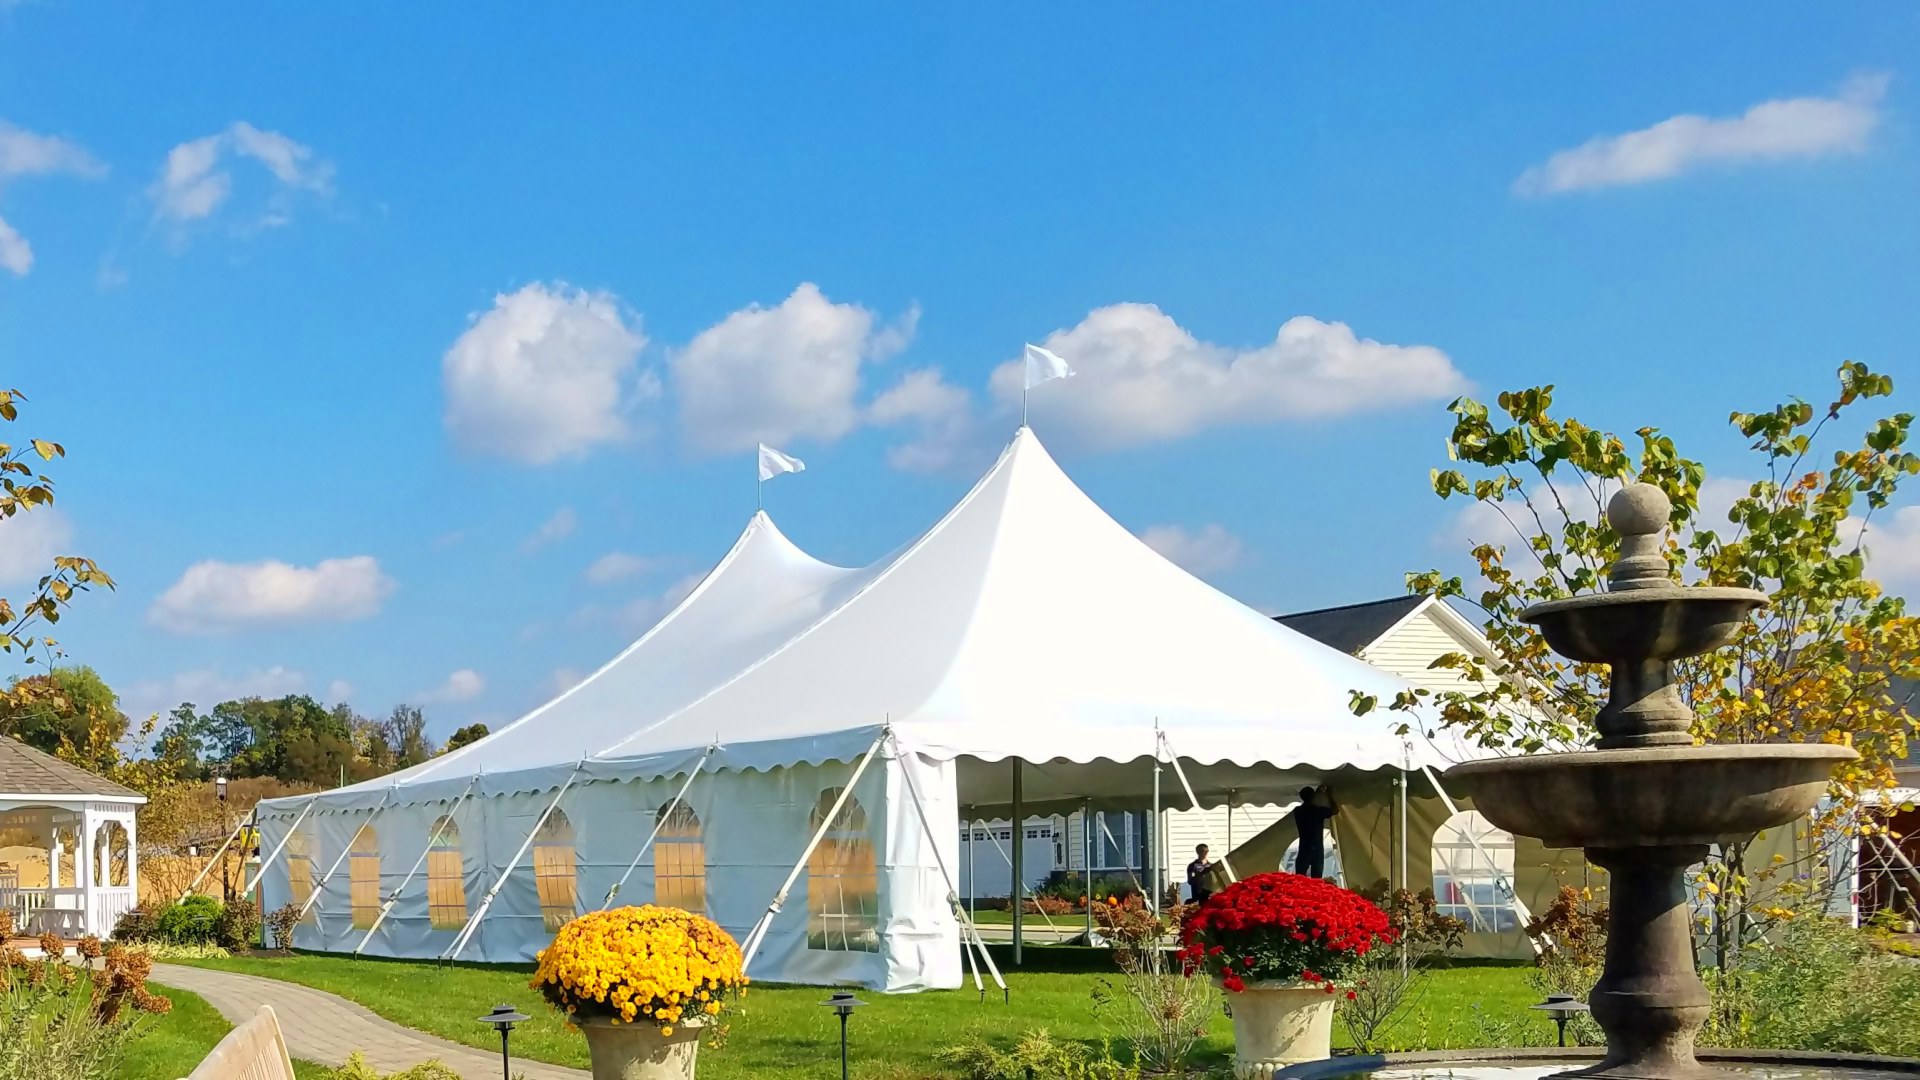 Nice white tent with cathedral window sidewalls for rent in Camp Hill, PA